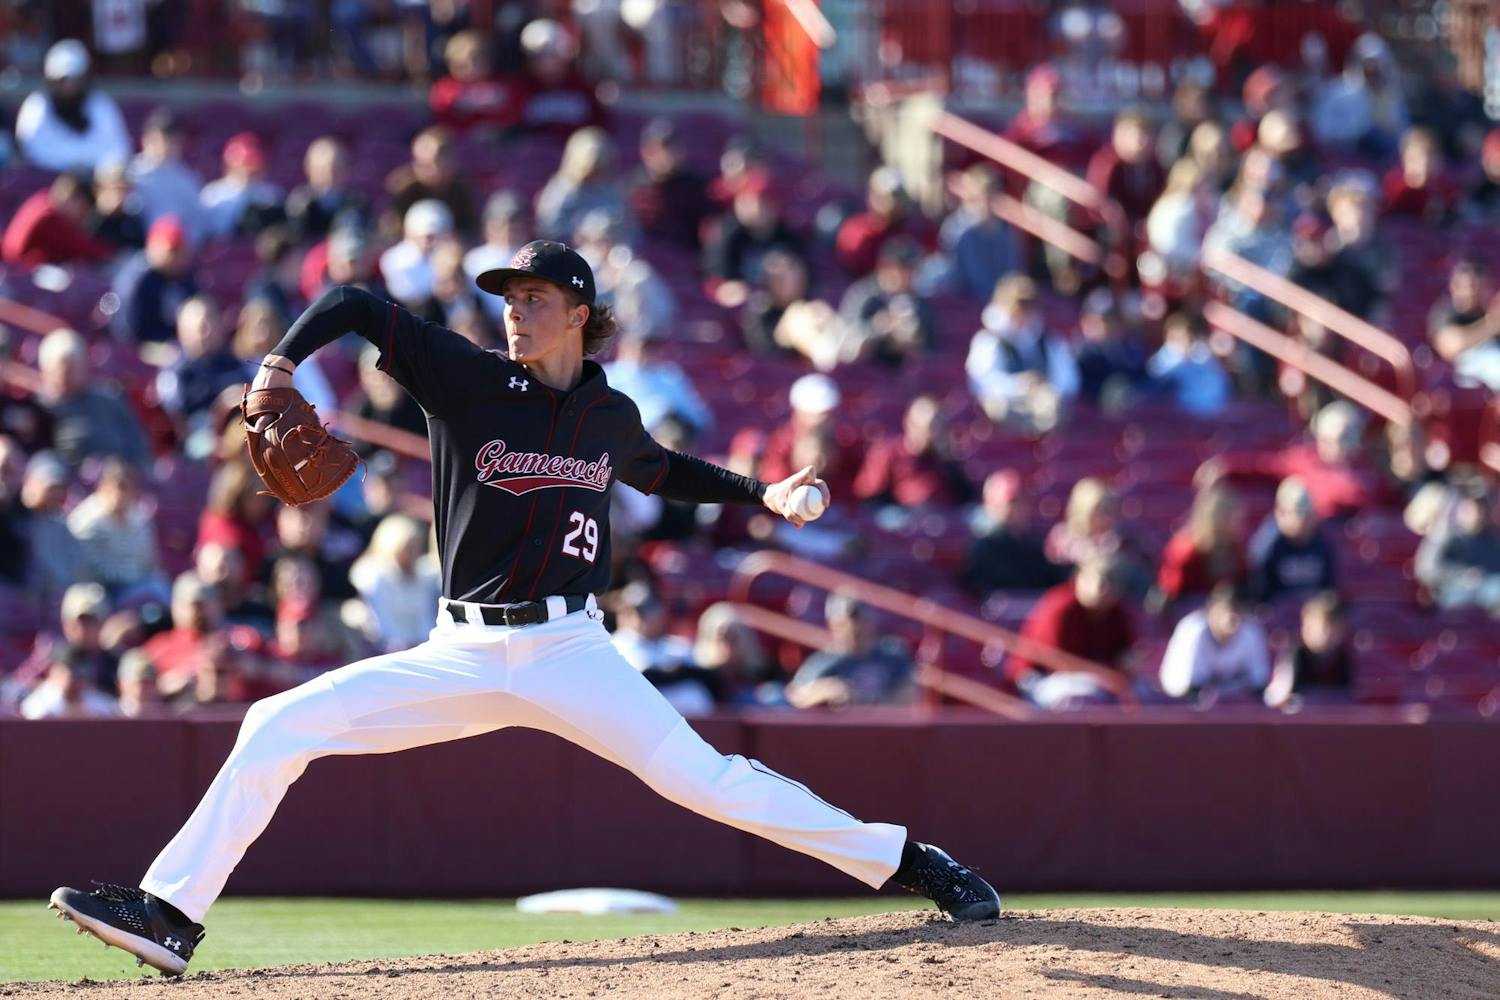 The South Carolina baseball team reached its fourth run-rule victory of the season and clinched a series win against Belmont on Feb. 25, 2024, at Founders Park. The Gamecocks started the weekend with an 8-1 victory Friday, followed by an 11-2 loss in game two on Saturday before wrapping up the weekend with a 12-1 victory over the Bruins. The team will continue its nine-game homestead on Tuesday when it hosts Gardner-Webb.&nbsp;